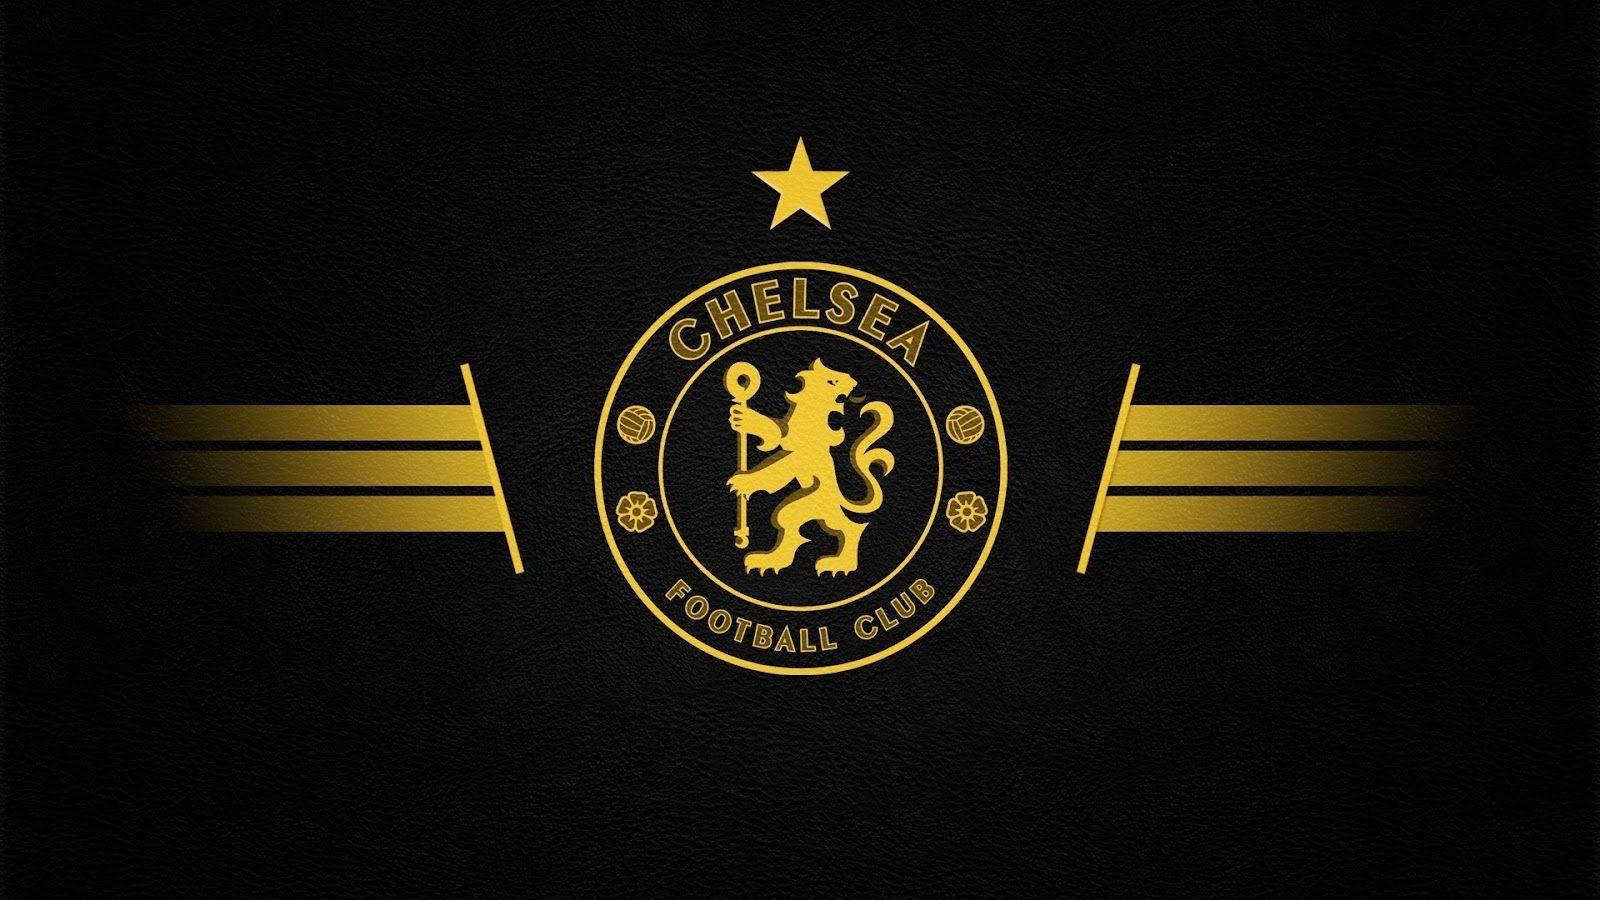 Chelsea Wallpaper Android Apps on Google Play. HD Wallpaper